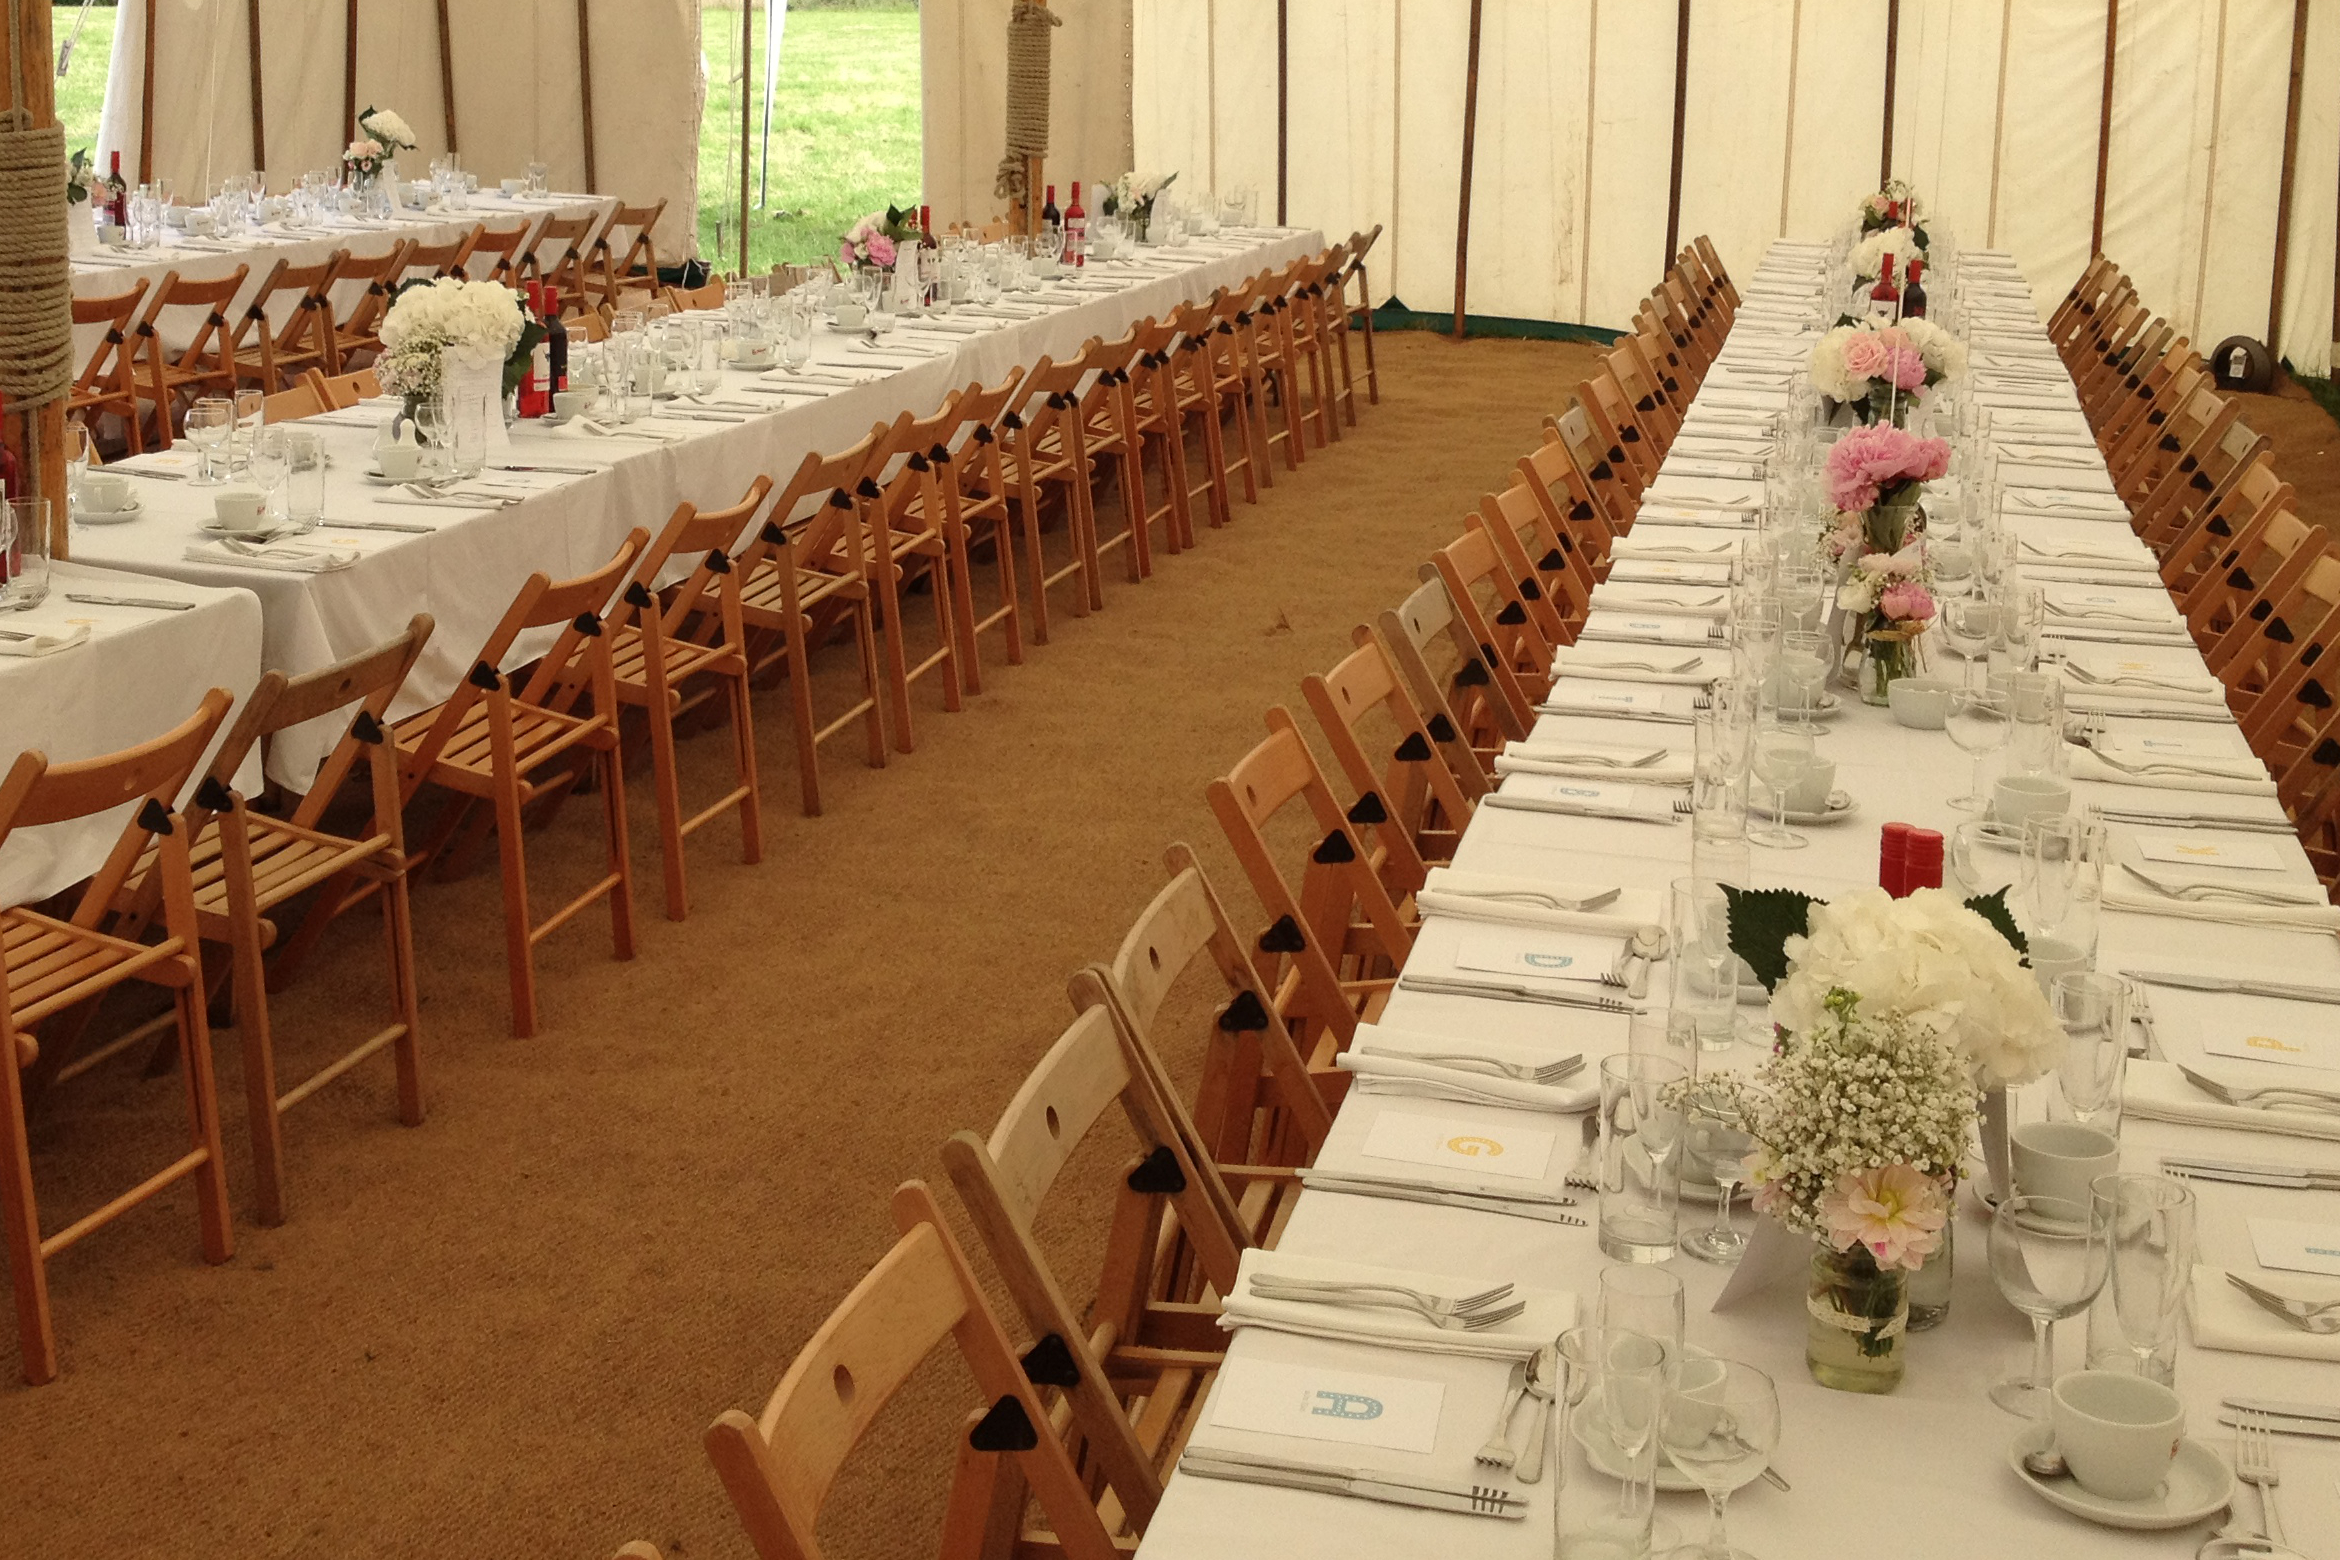 Marquee wedding with catering by PJ taste in Derbyshire